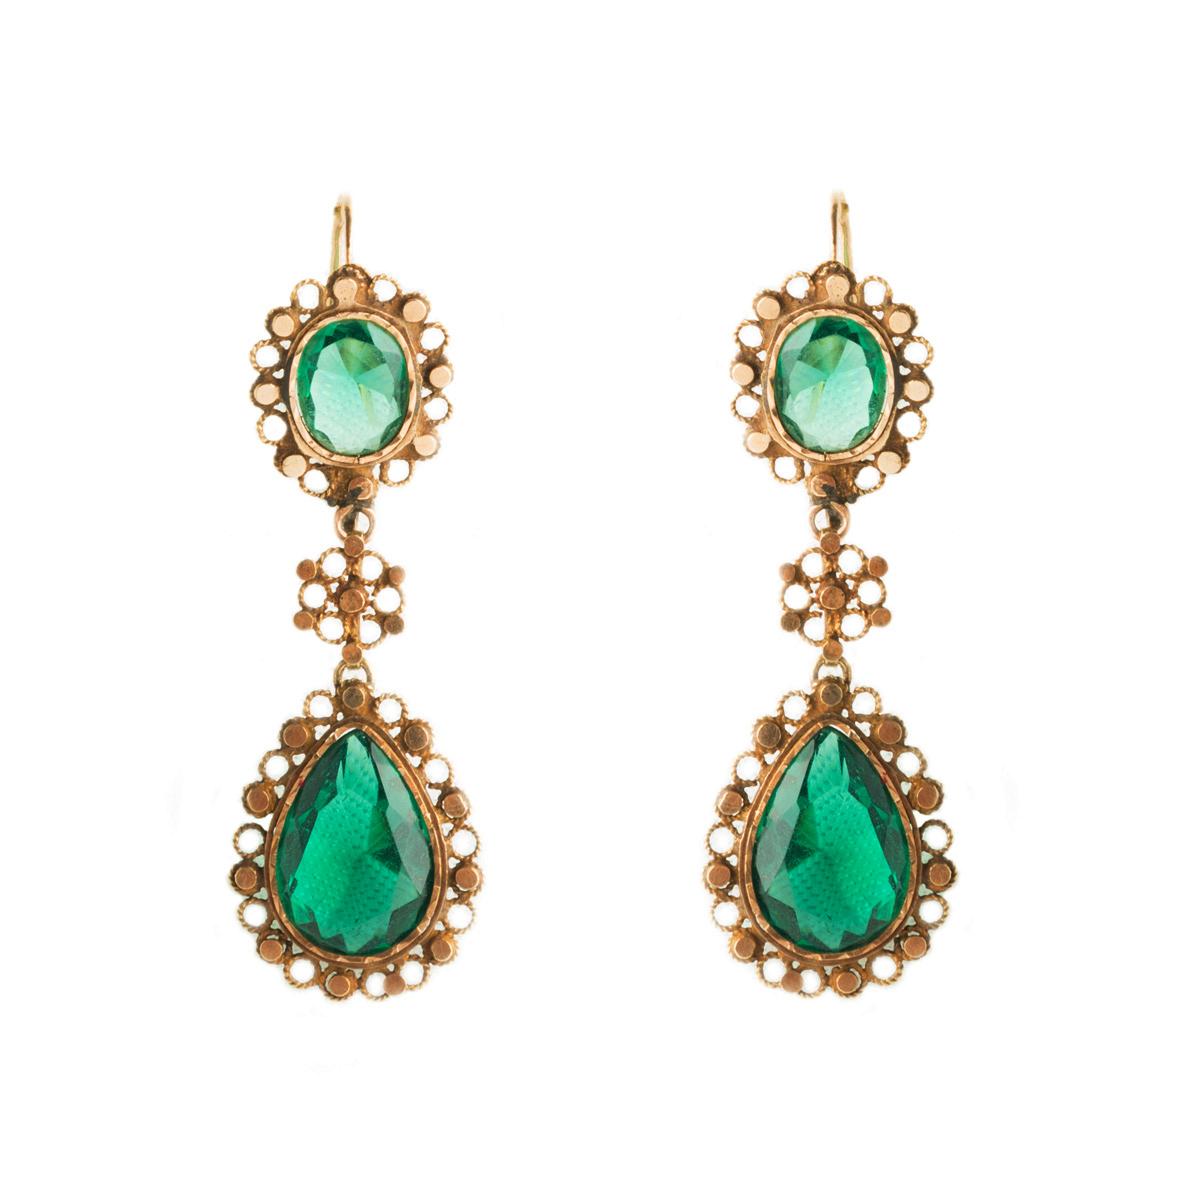 Fascinating 14 kt gold pendant earrings with green glass pastes from the early 1900s, Sicily. Since ancient times, earrings have been a precious ornament, they were a much-loved accessory, and this made their use more and more widespread. Sicilian